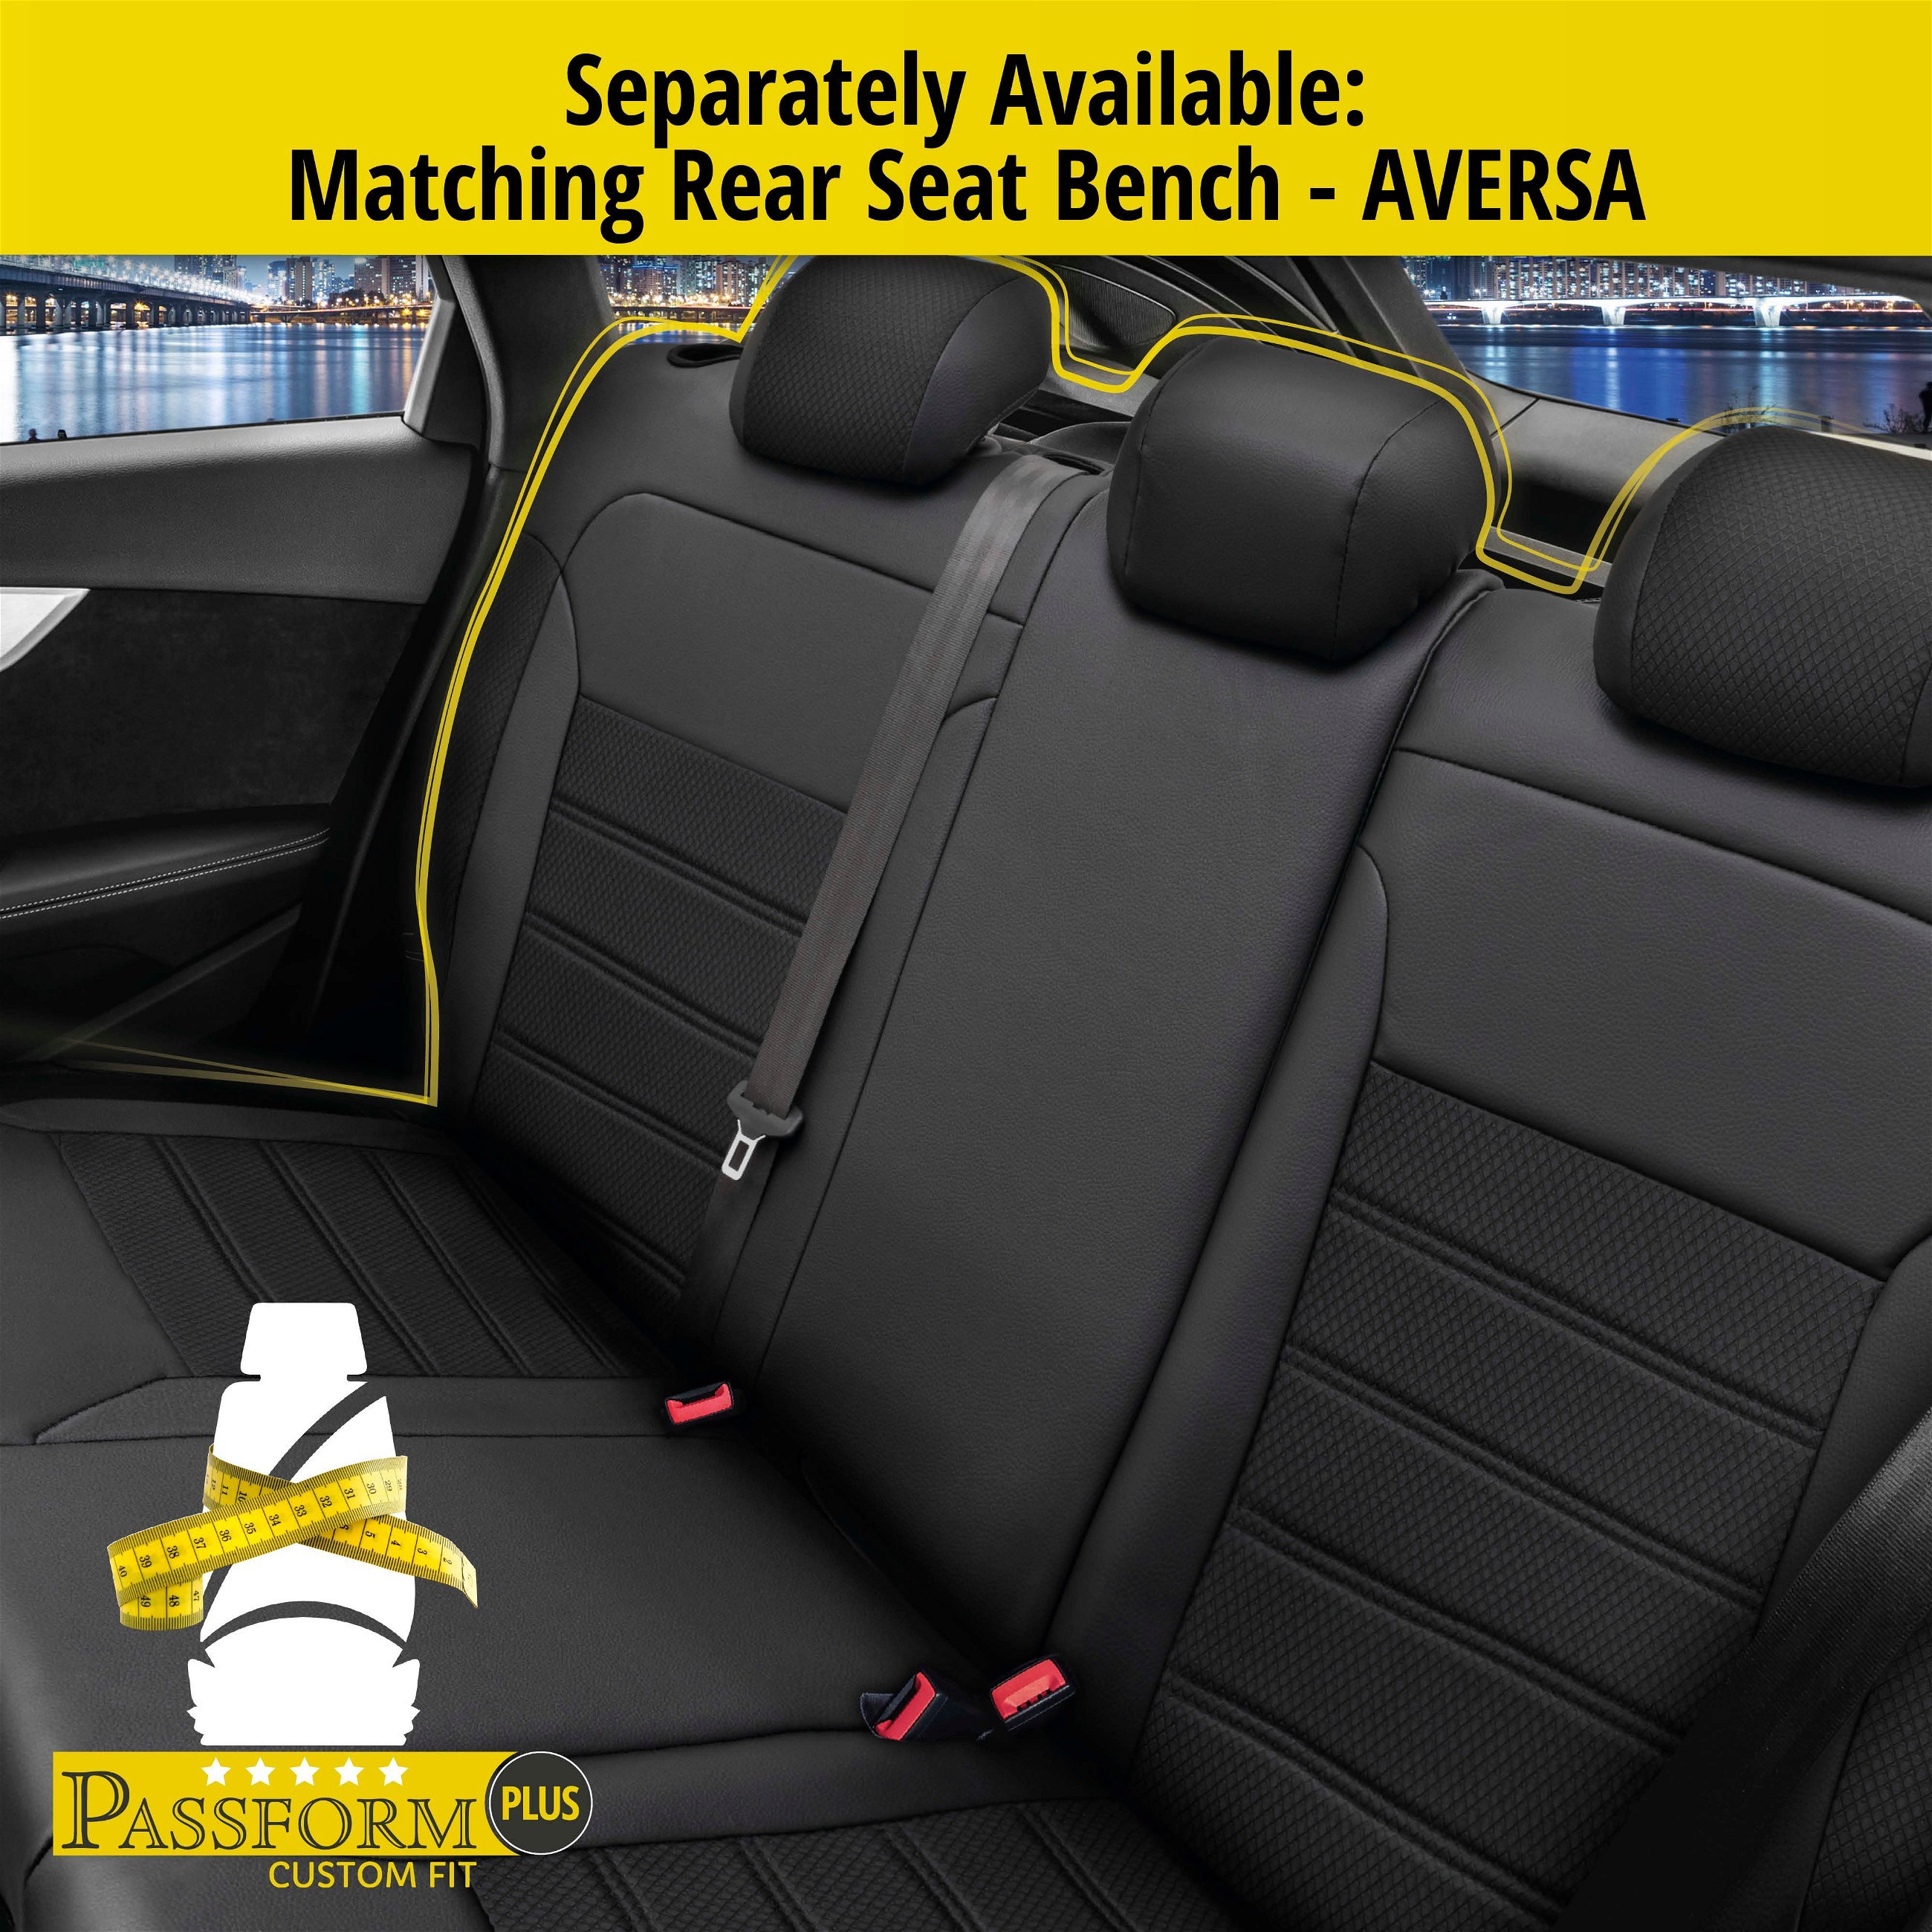 Seat Cover Aversa for VW Touran (1T1, 1T2) 02/2003-05/2010, 2 seat covers for normal seats